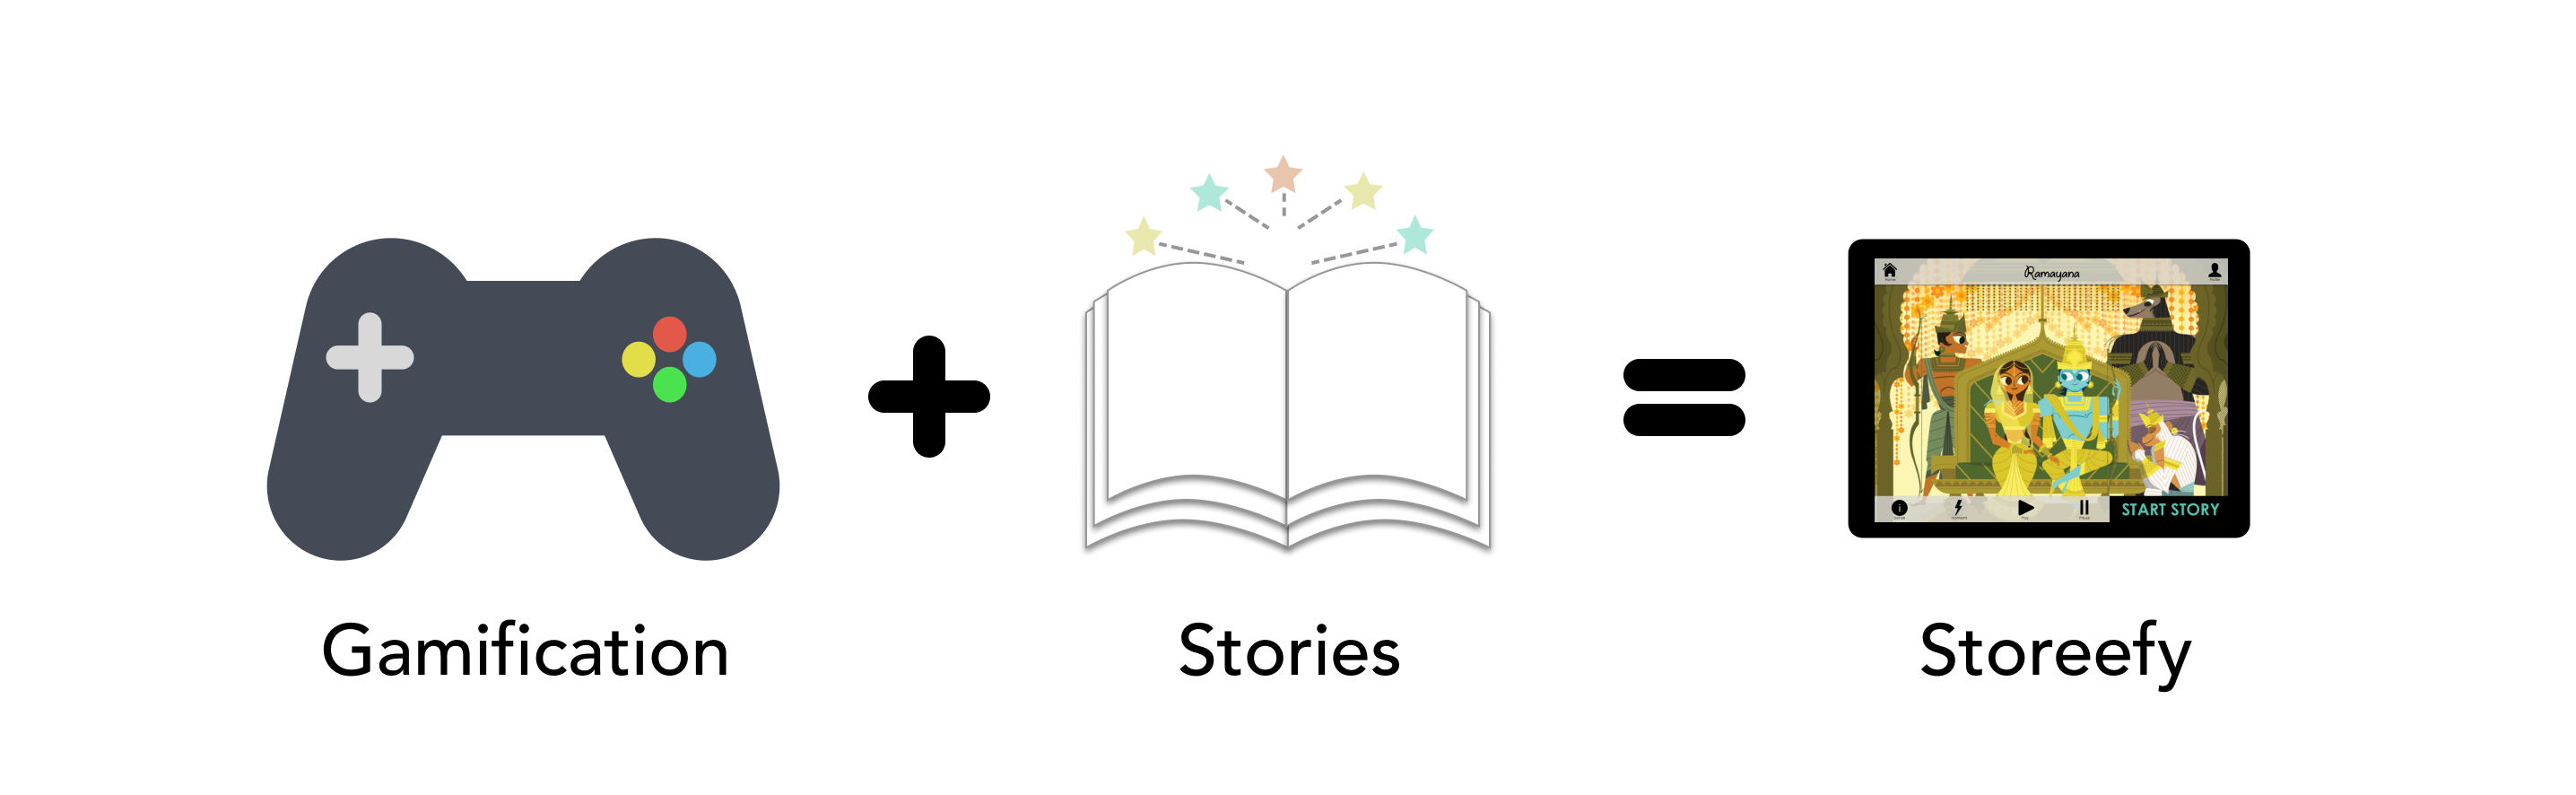 Storeefy = Gamification + Stories